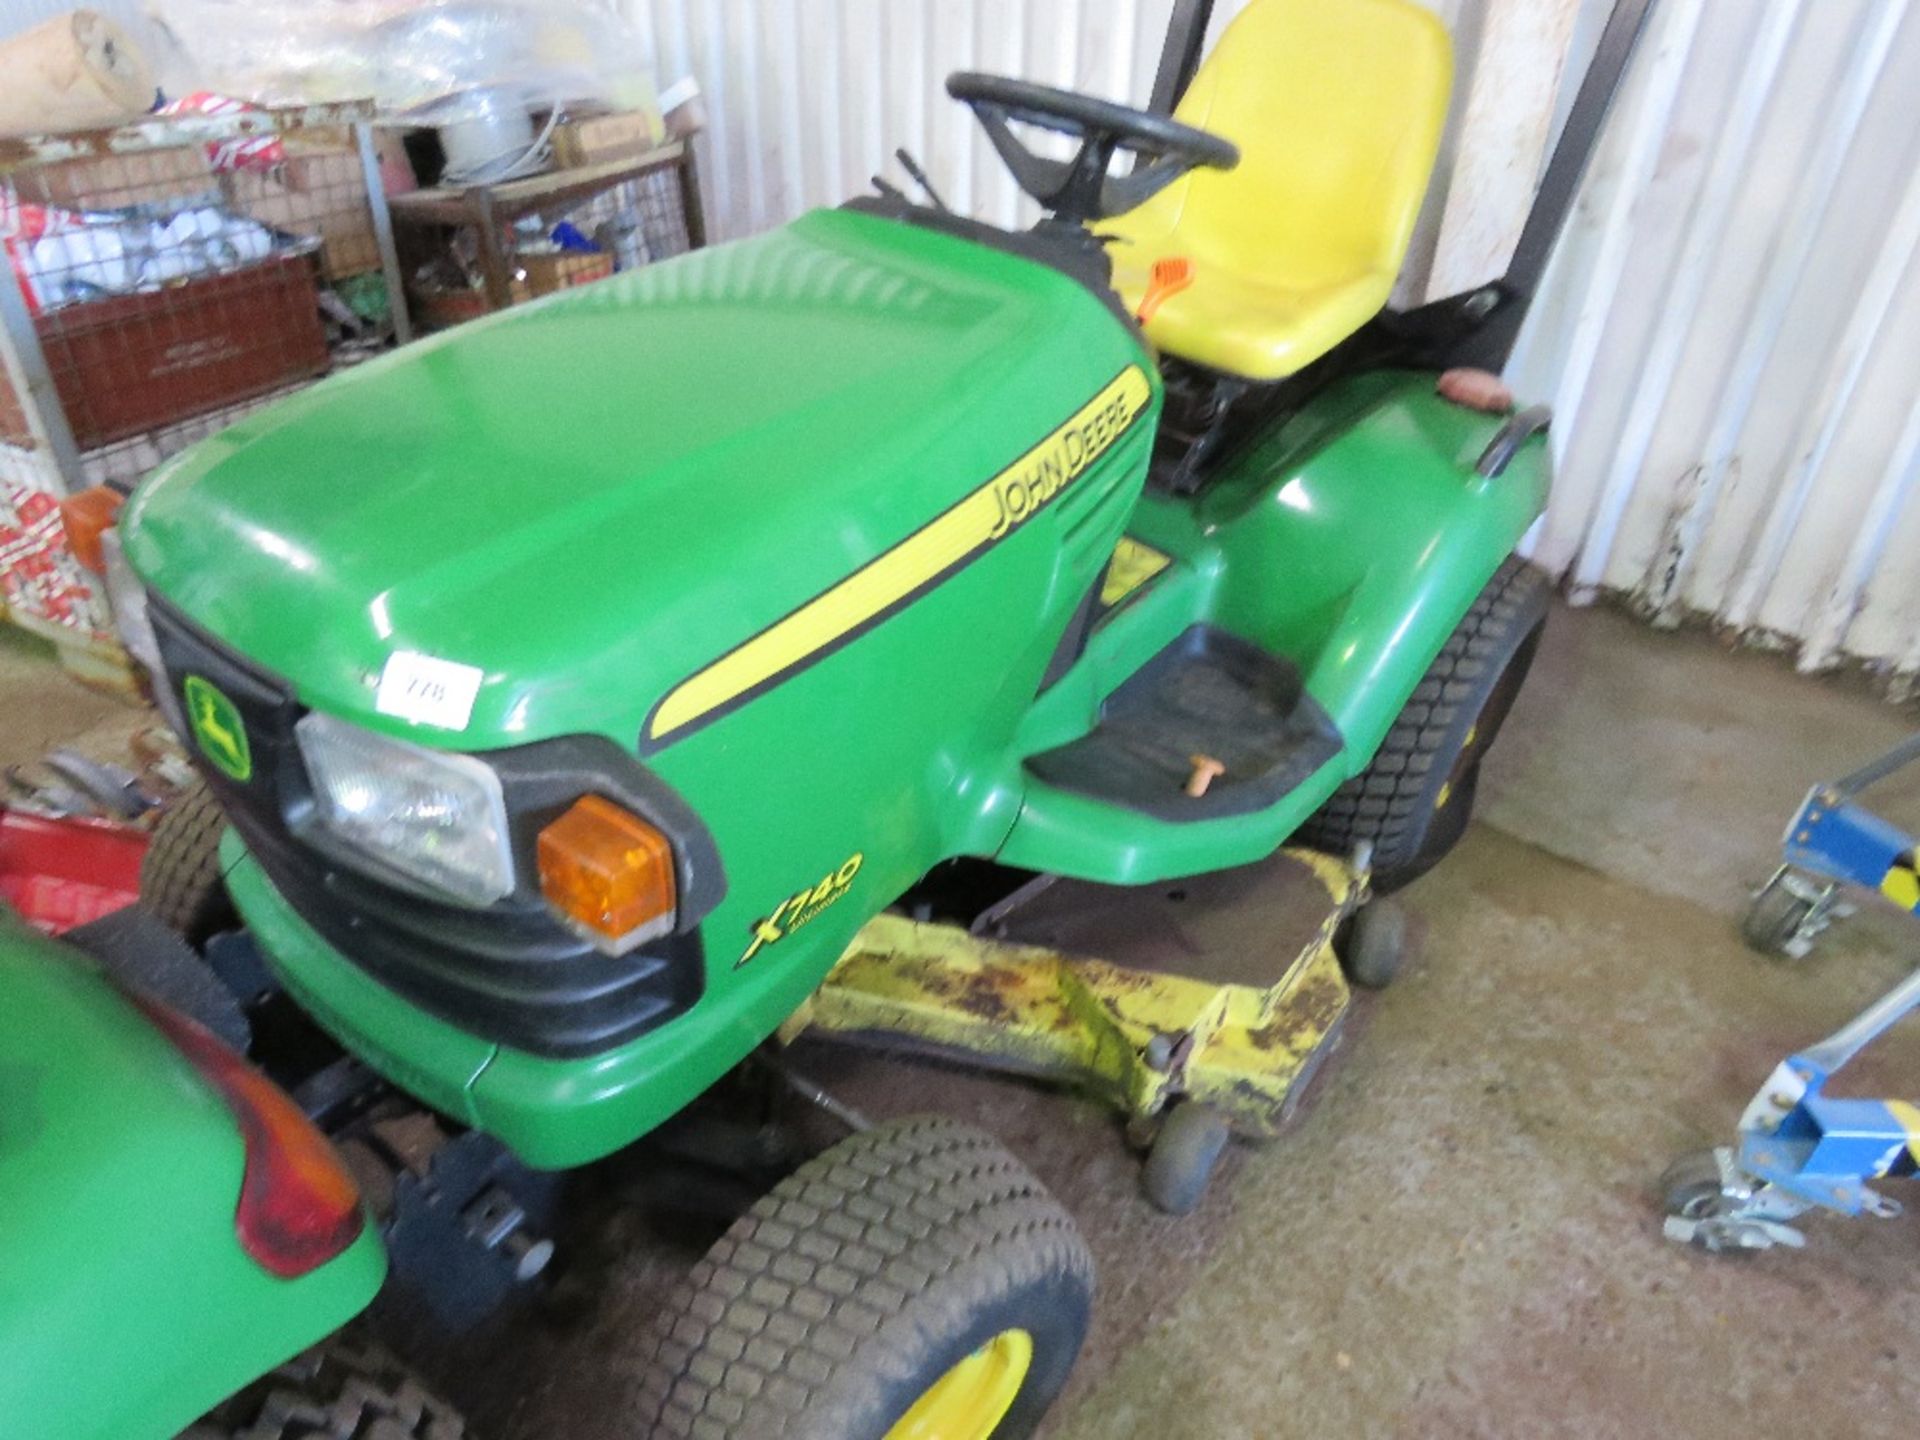 JOHN DEERE X740 2WD RIDE ON MOWER. WHEN TESTED WAS SEEN TO RUN, DRIVE, STEER AND MOWERS TURNED. 1416